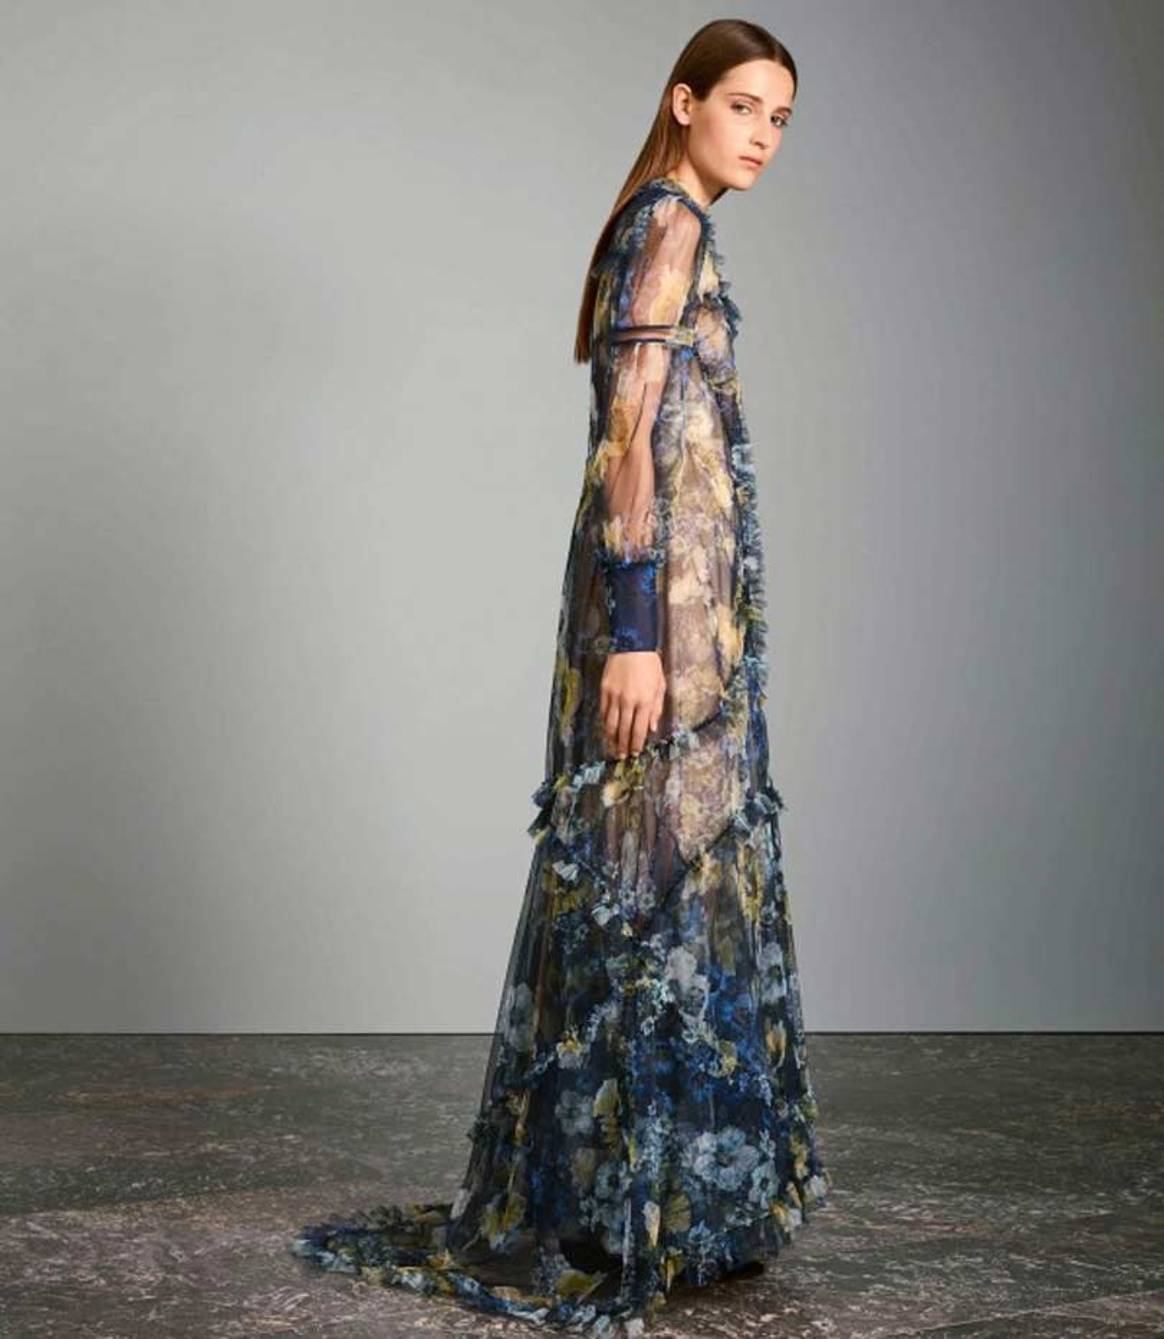 In Pictures: 8 things to expect from Erdem X H&M